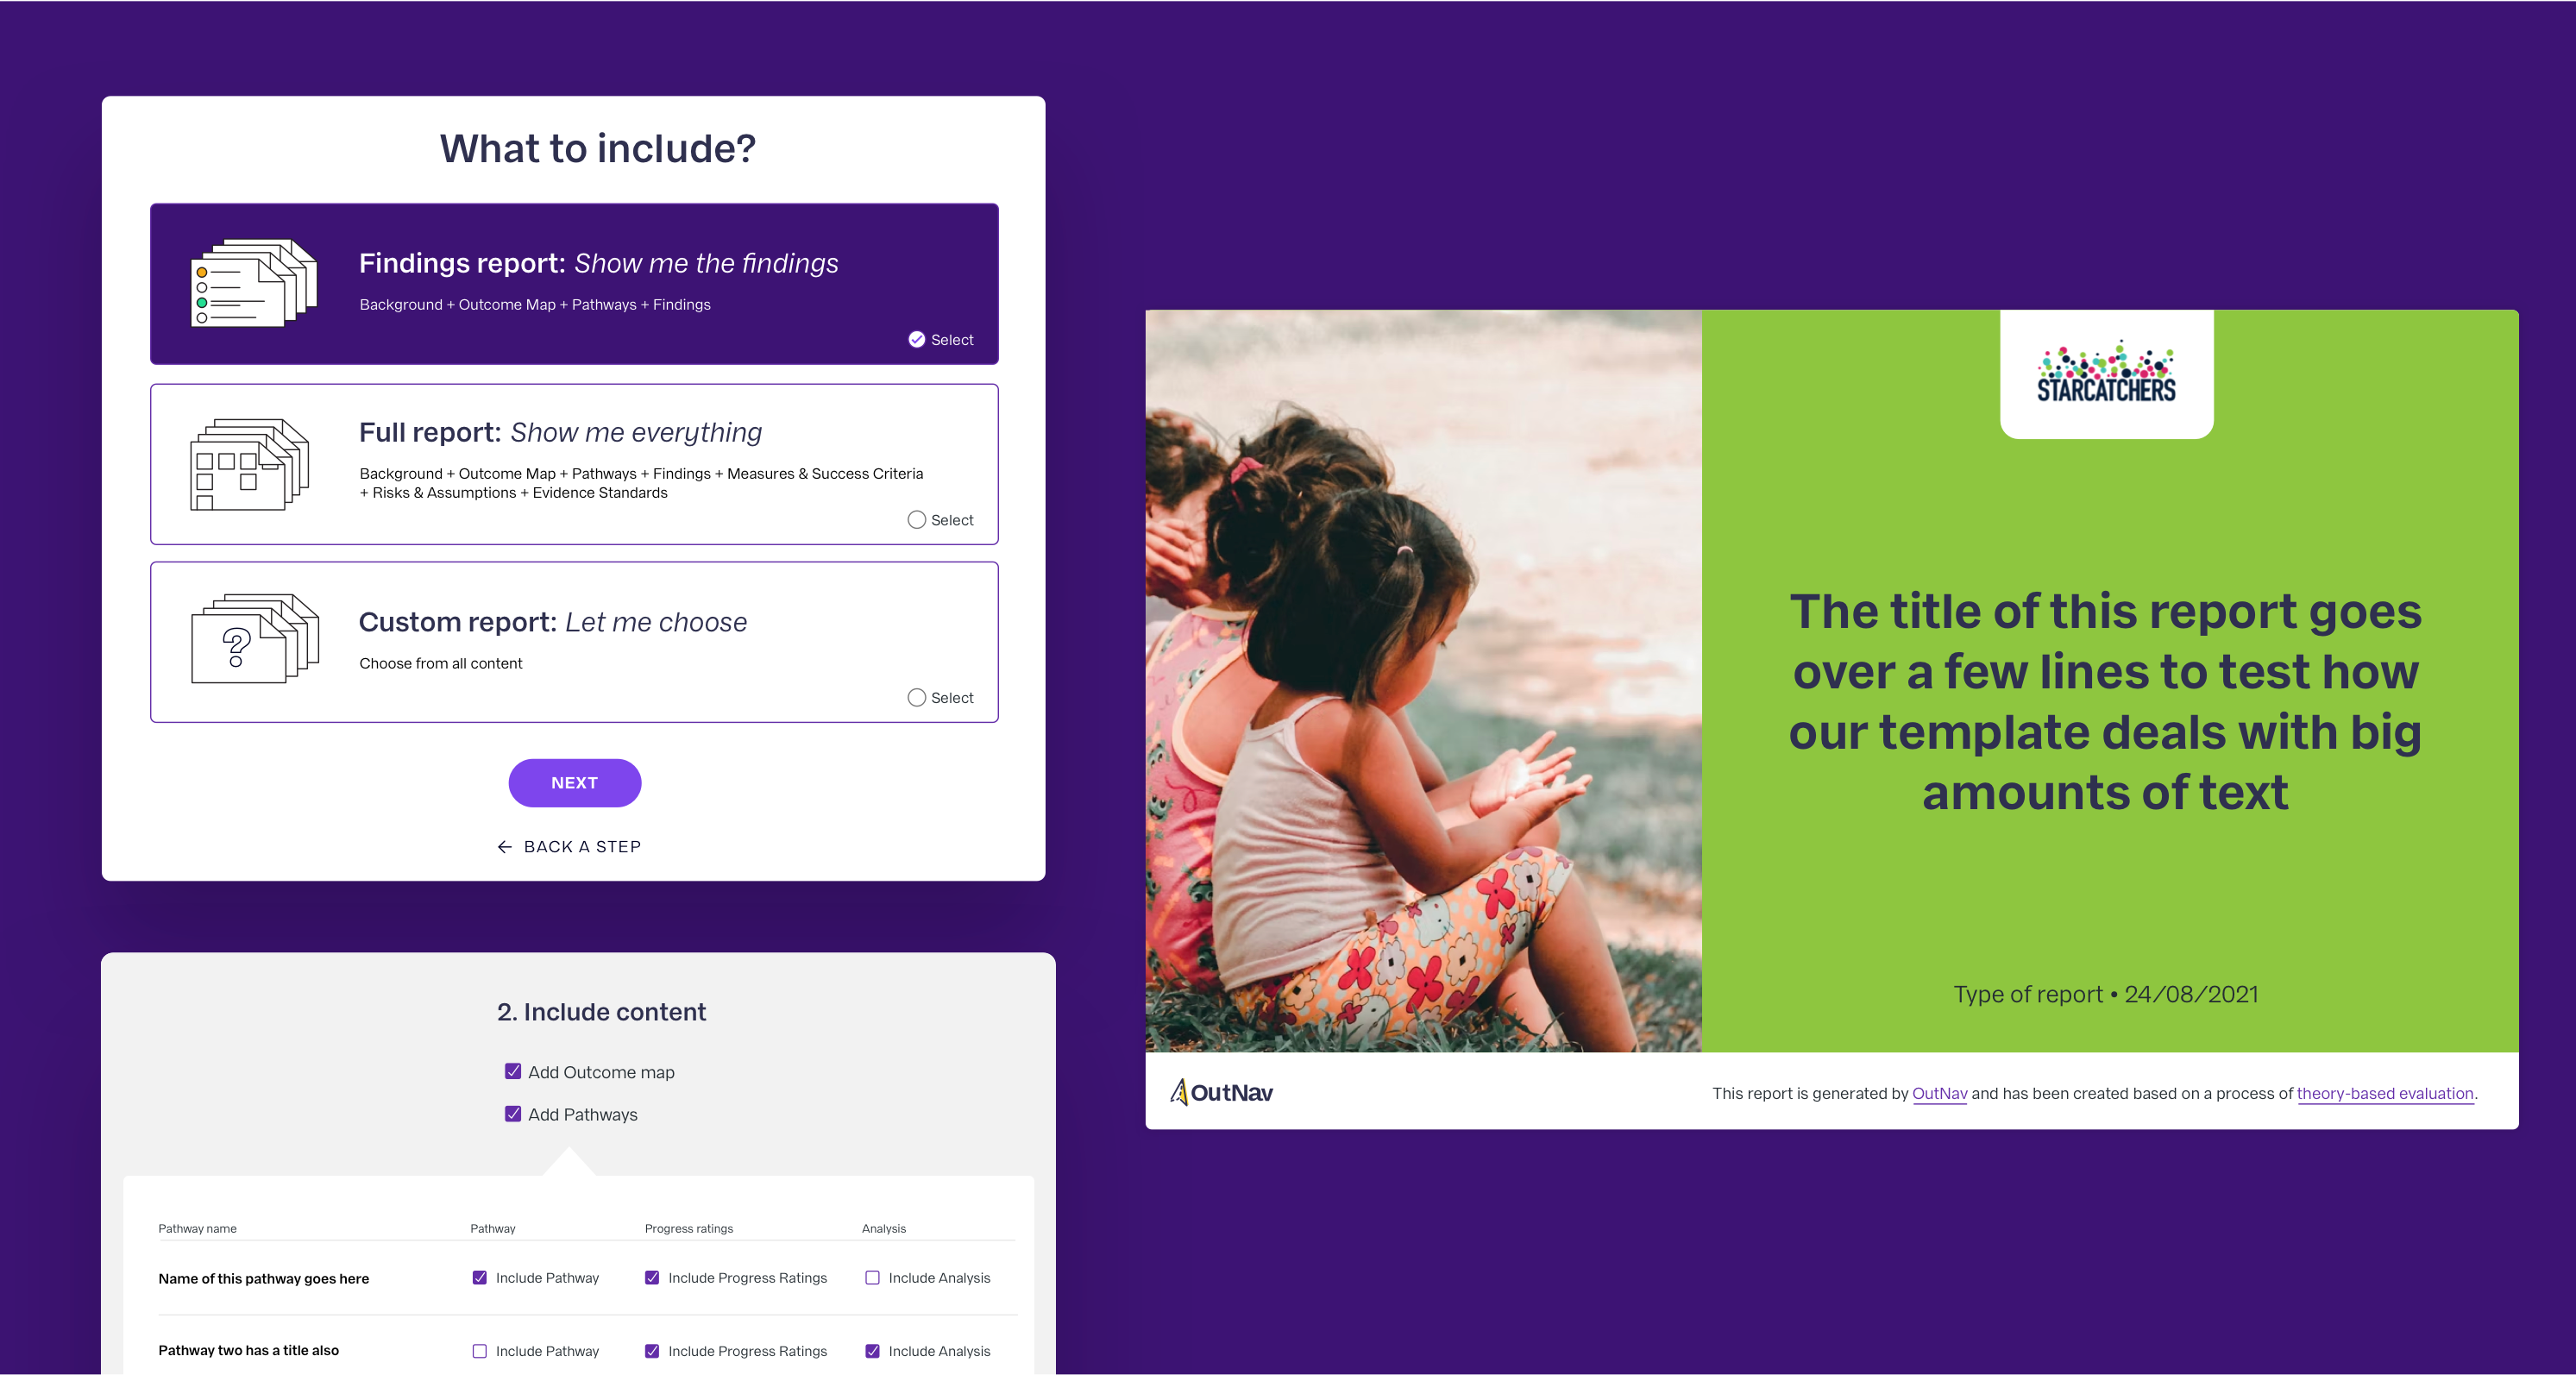 Two web report-creation elements sit on the left hand side of a purple background. On the right hand side, sits a presentation slide, which shows three small sitting children in profile. Next to this photo is a green image with purple text “The title of this report goes over a few lines to test how our template deals with big amounts of text”